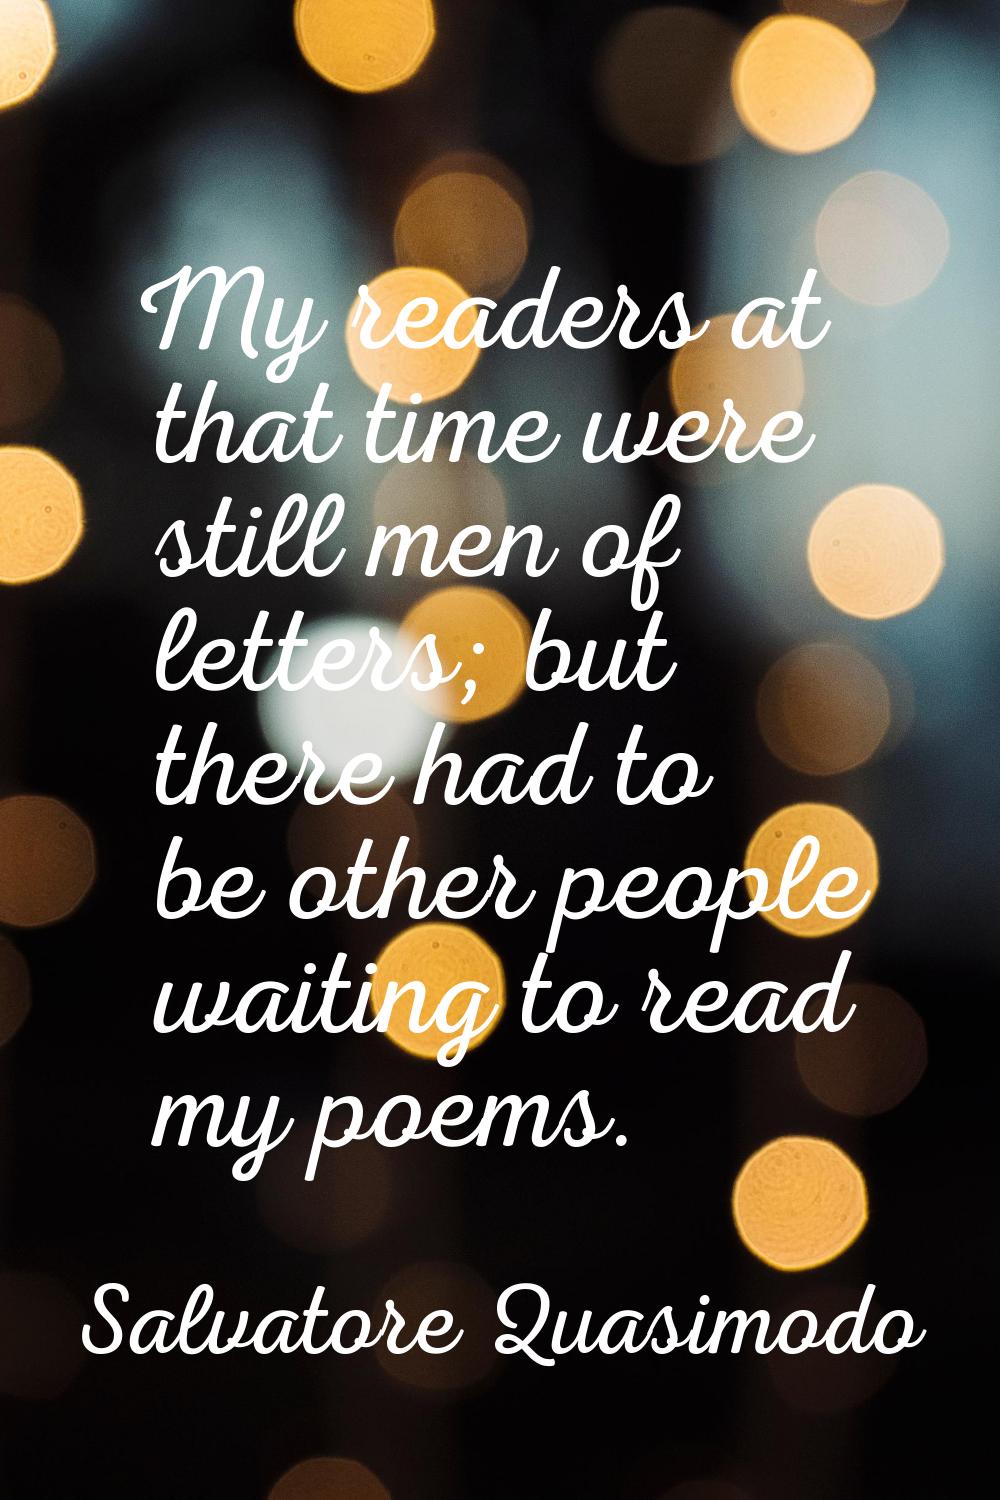 My readers at that time were still men of letters; but there had to be other people waiting to read